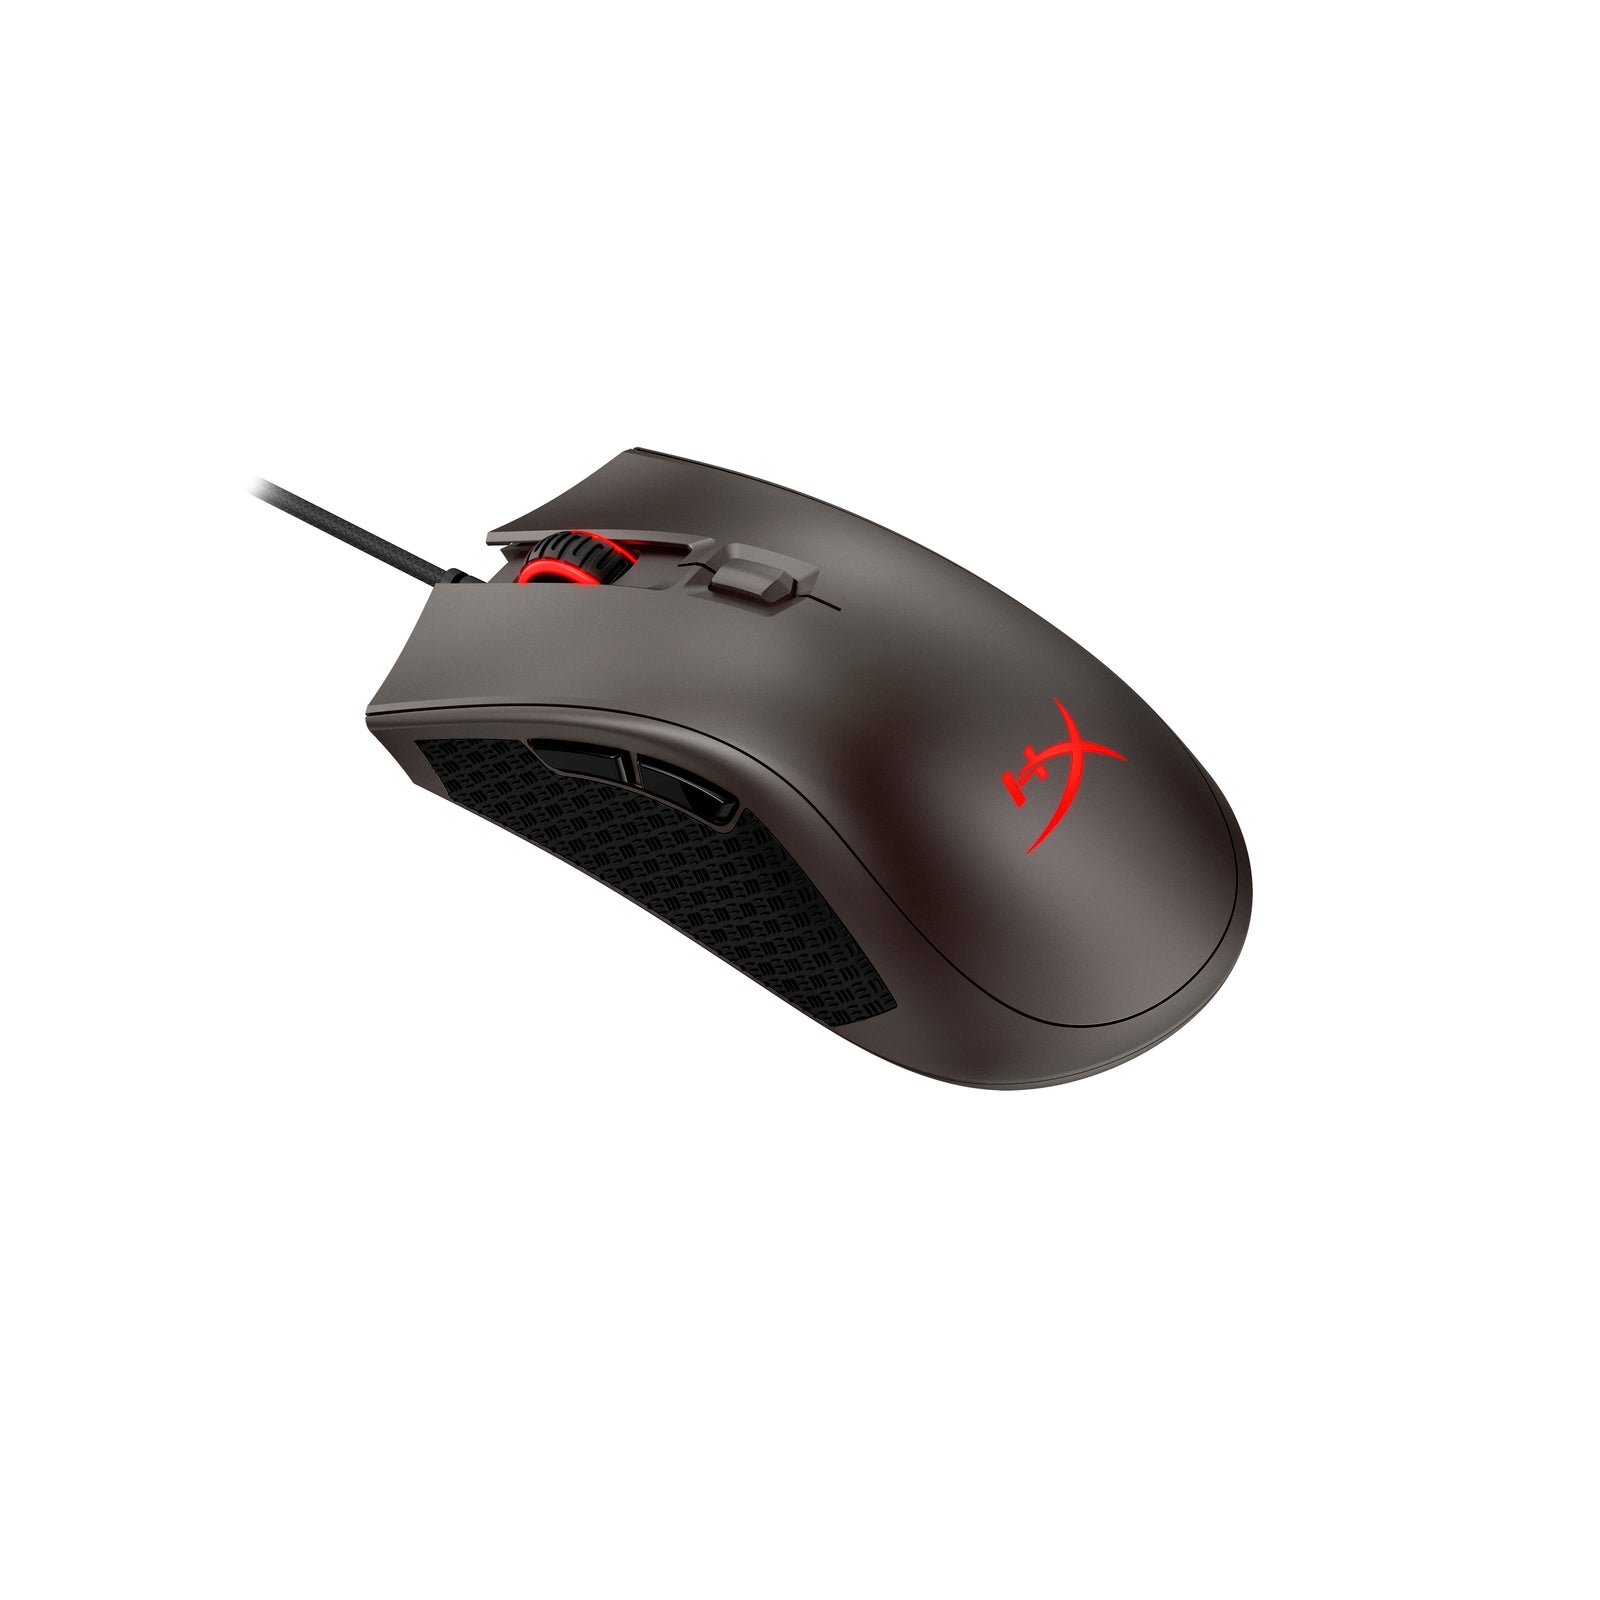 HyperX Pulsefire FPS Pro Gaming Mouse Angled back view